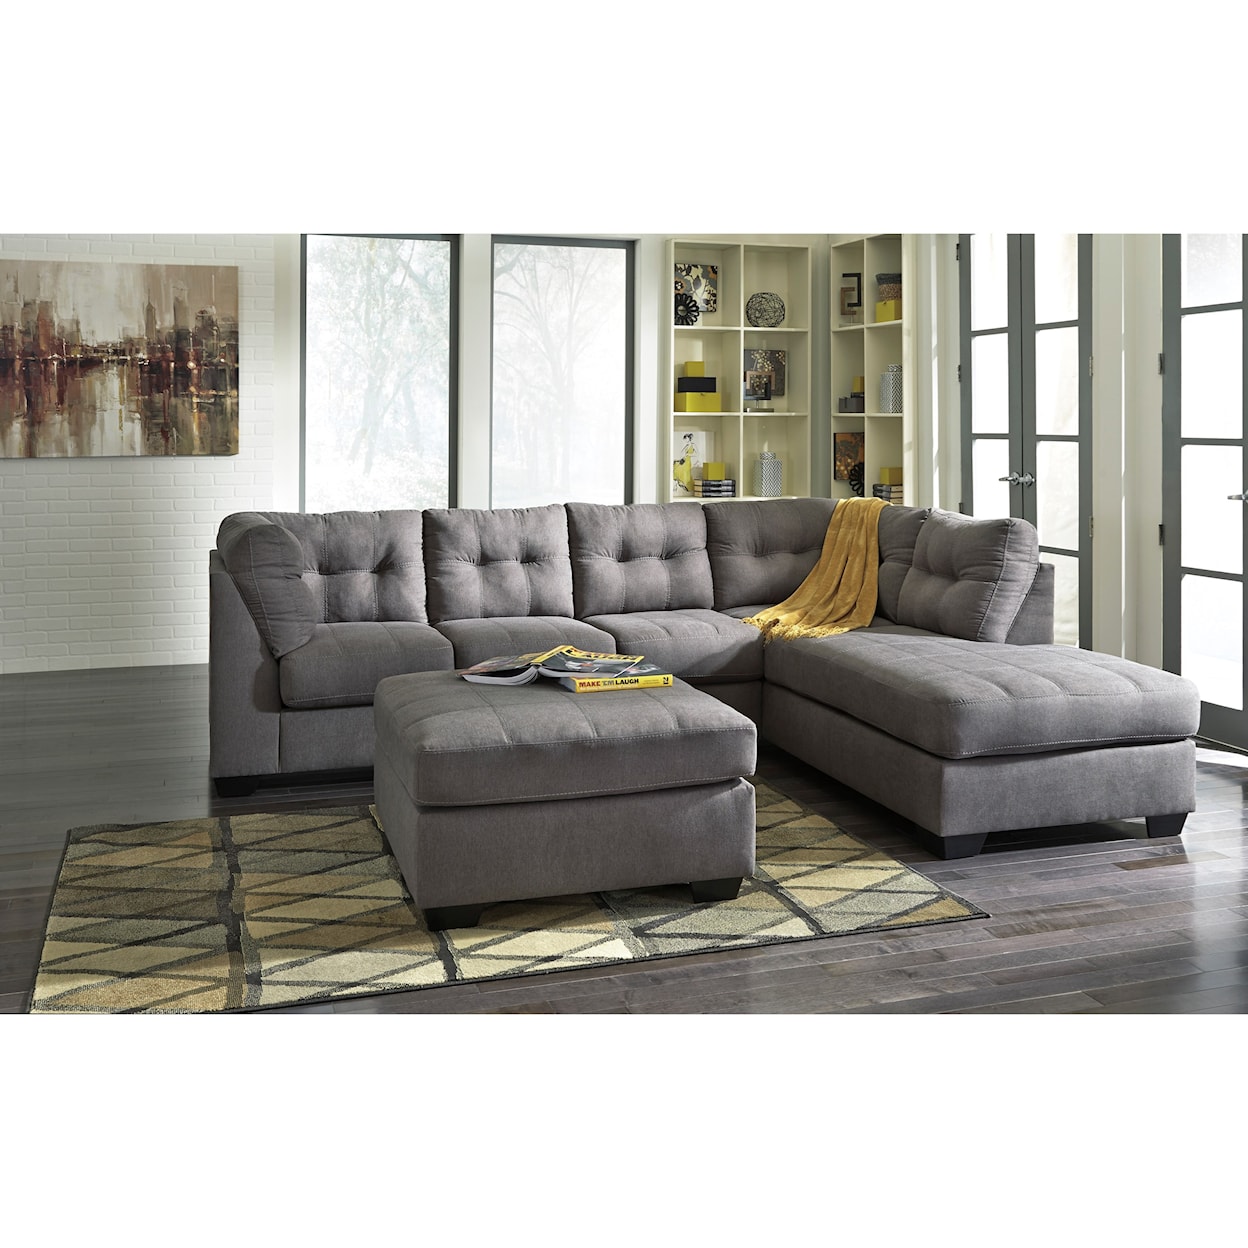 Benchcraft Maier Living Room Group